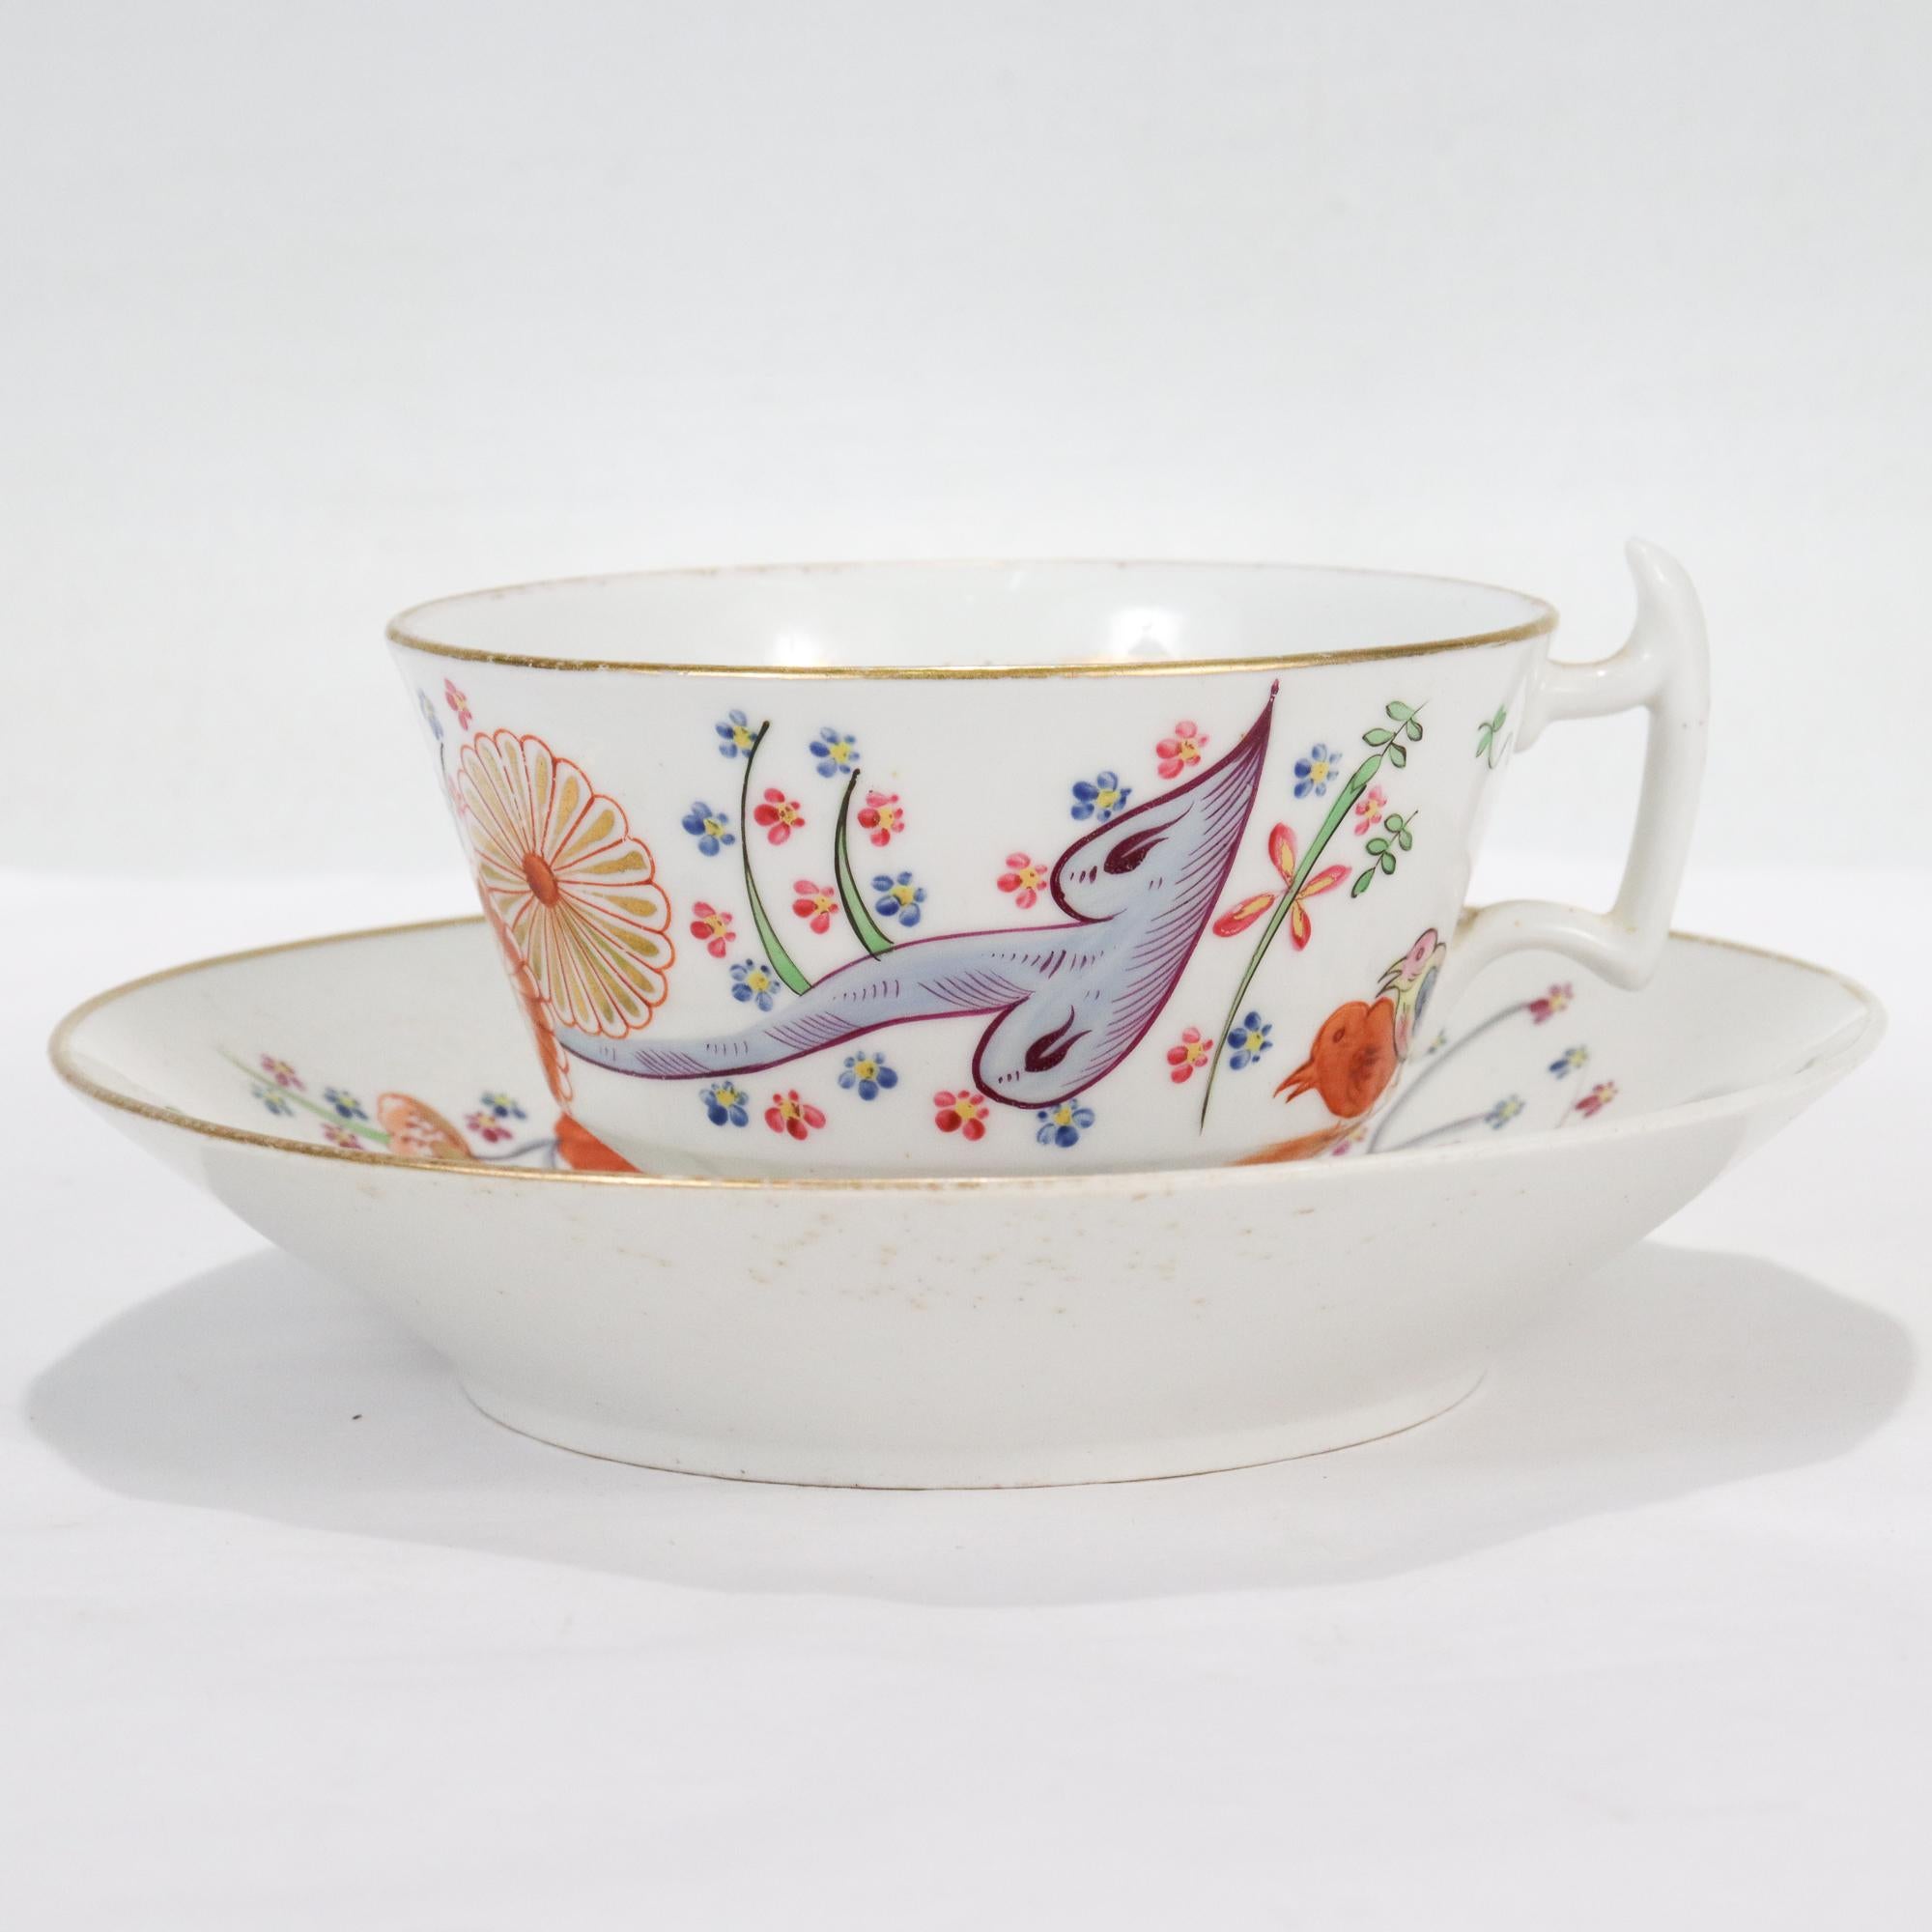 A fine antique English porcelain cup & saucer.

In the Quail pattern. 

By Chamberlain Worcester.

With painted green, blue, and red painted floral decoration with a pair of quails.

Both cup and saucer have gilt rims & highlights.

Simply